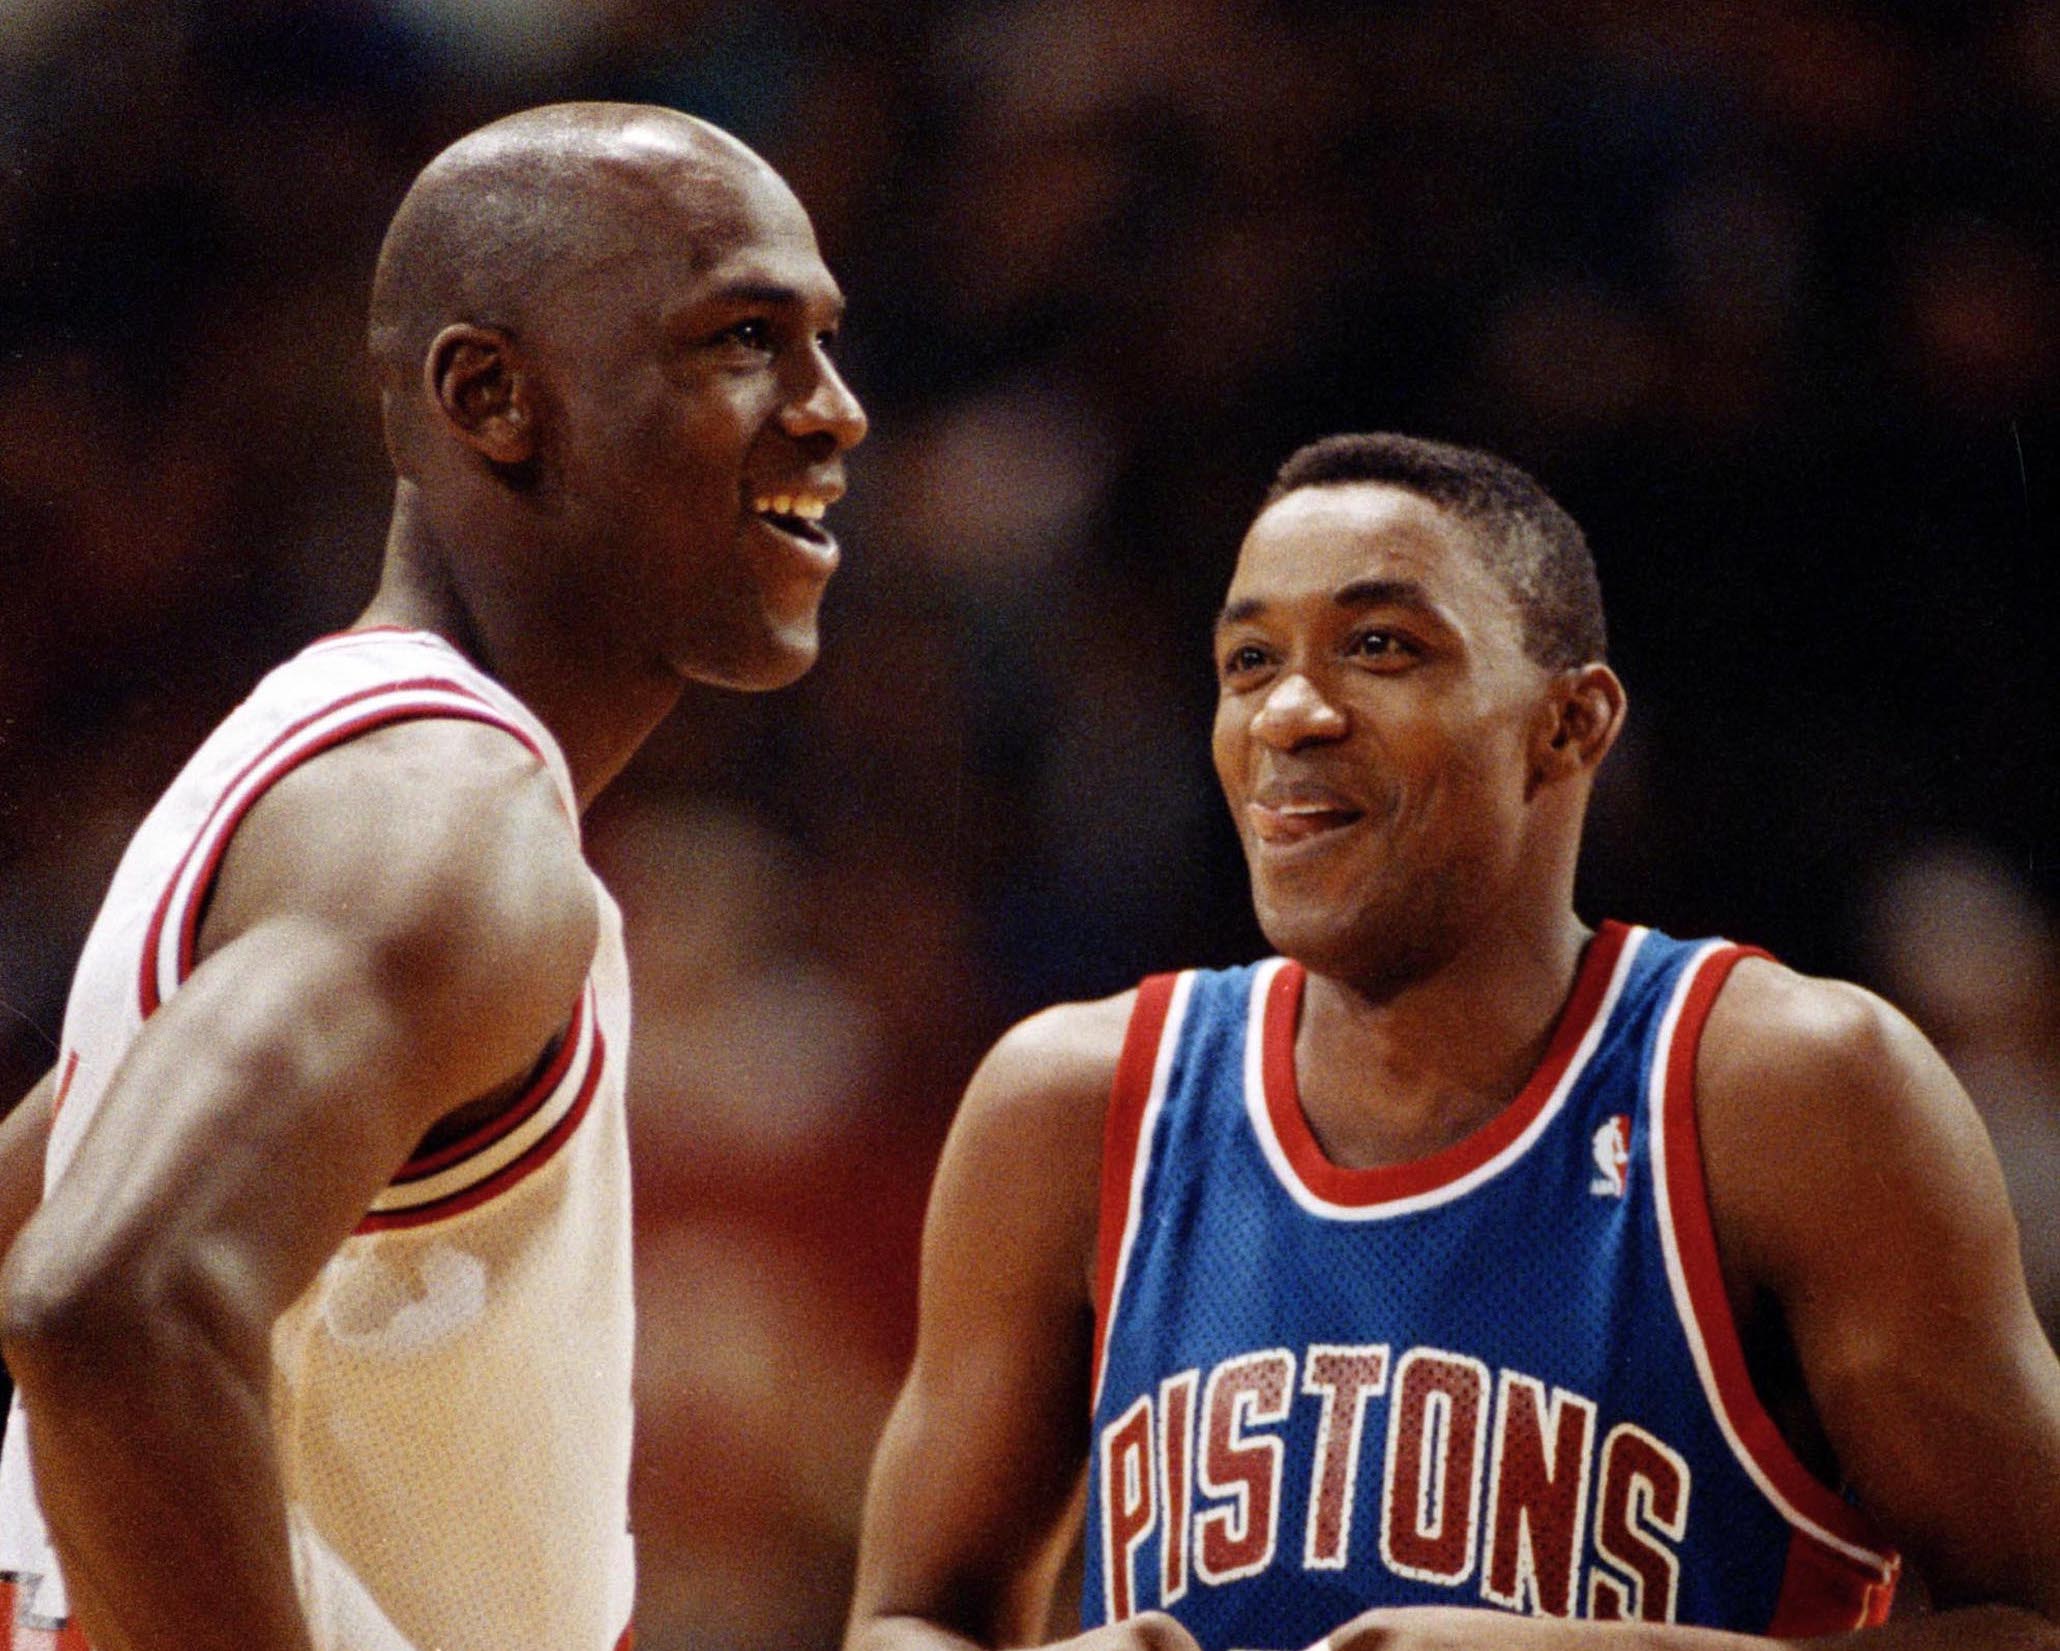 The Source |Isiah Thomas Says He Wants Michael Jordan To Stop Lying About Alleged 1985 All-Star Game Freeze-Out